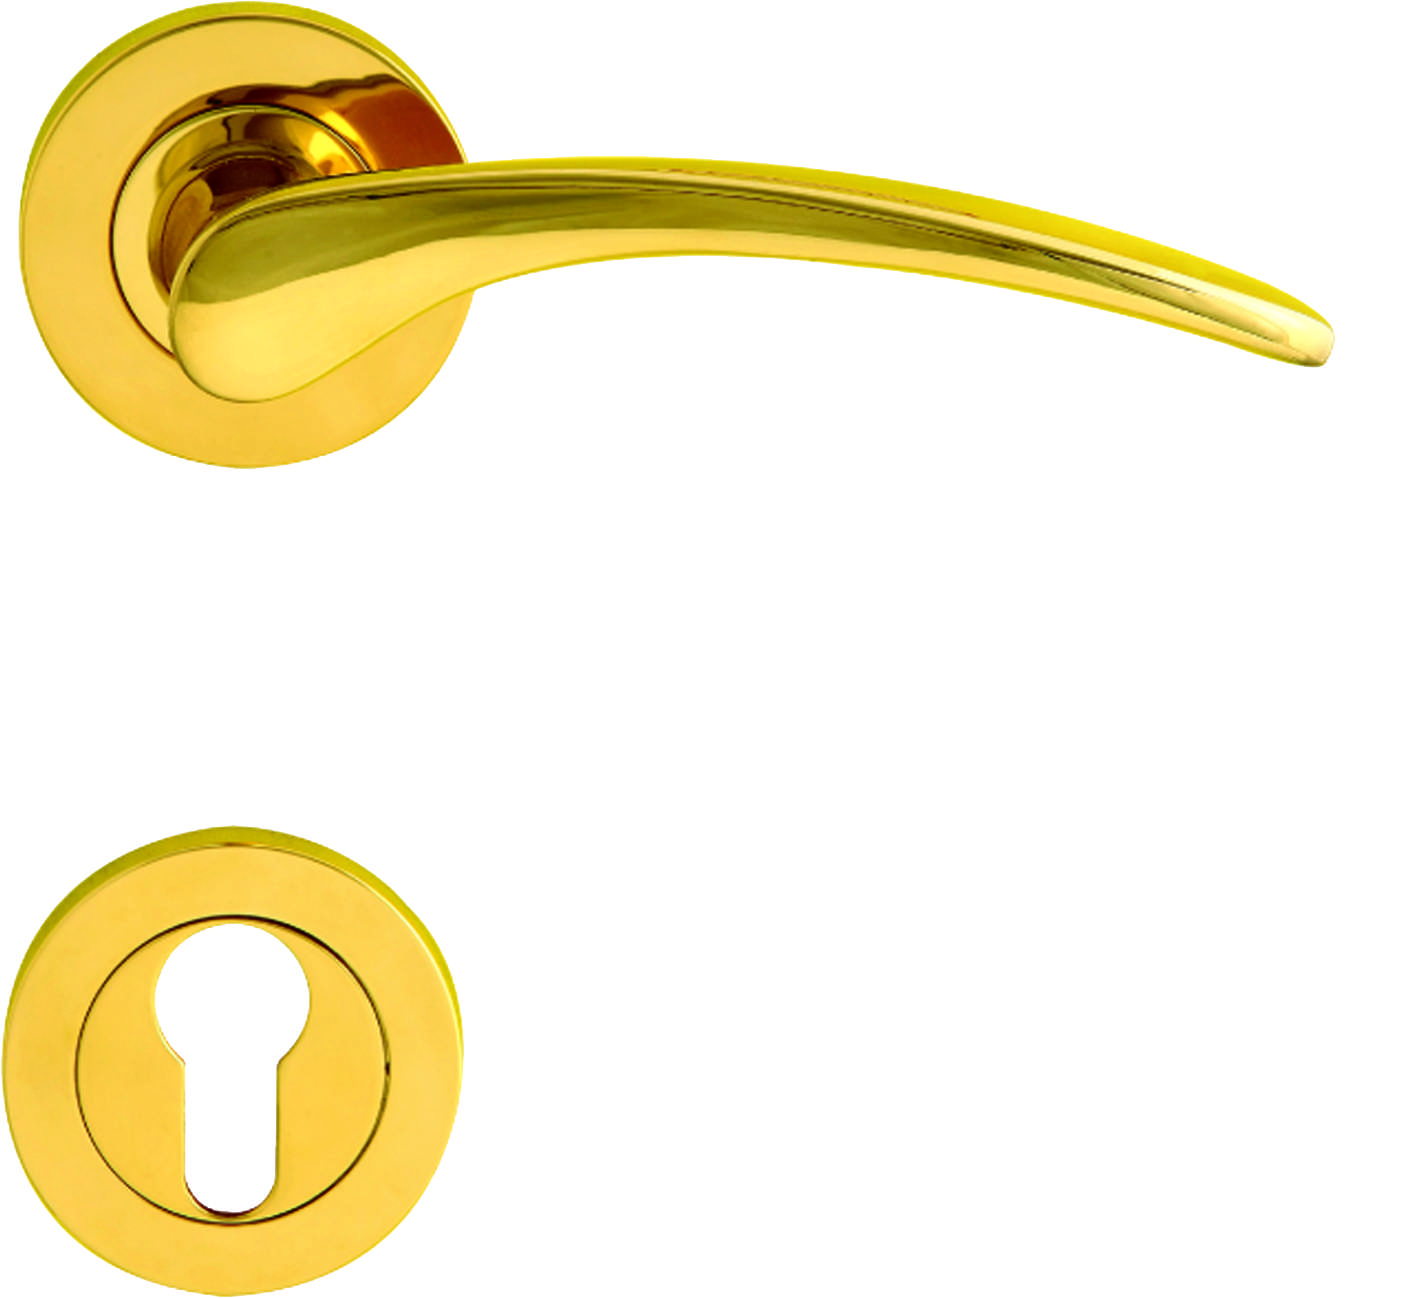 Brass Door Lock With PVD Finishing B-RM0105-PVD Door Handle From China Supplier